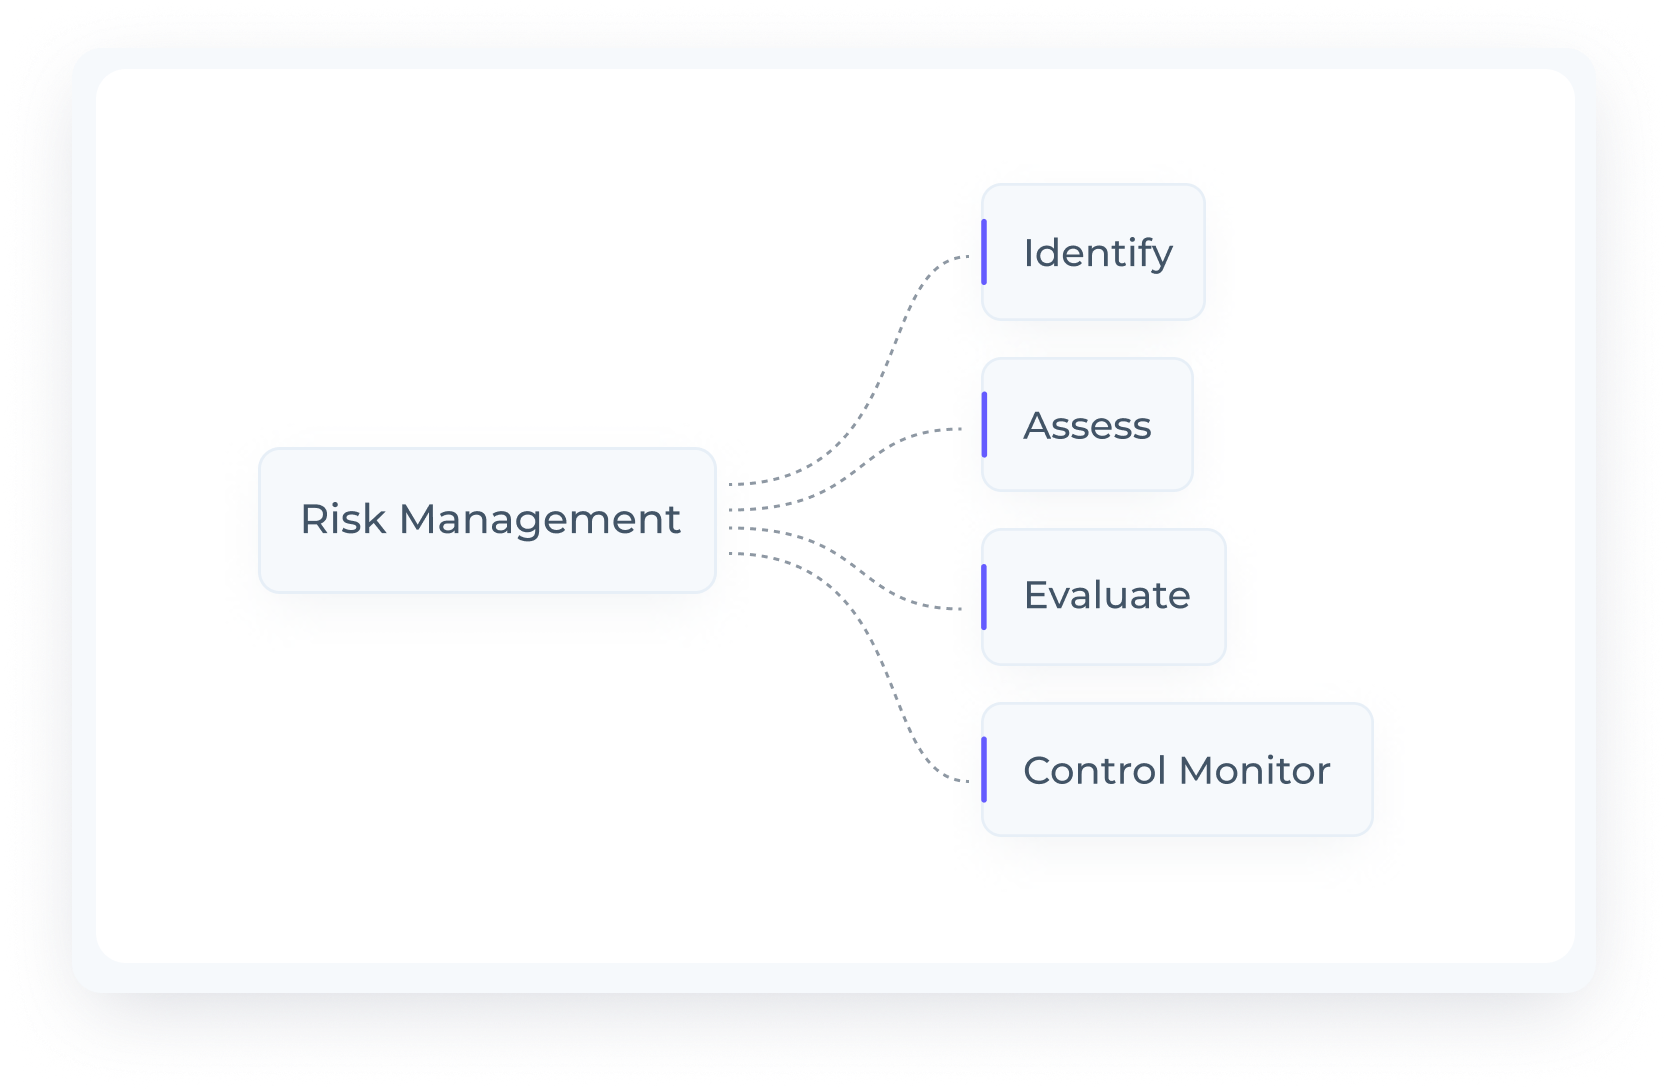 Visual guide depicting process of risk management